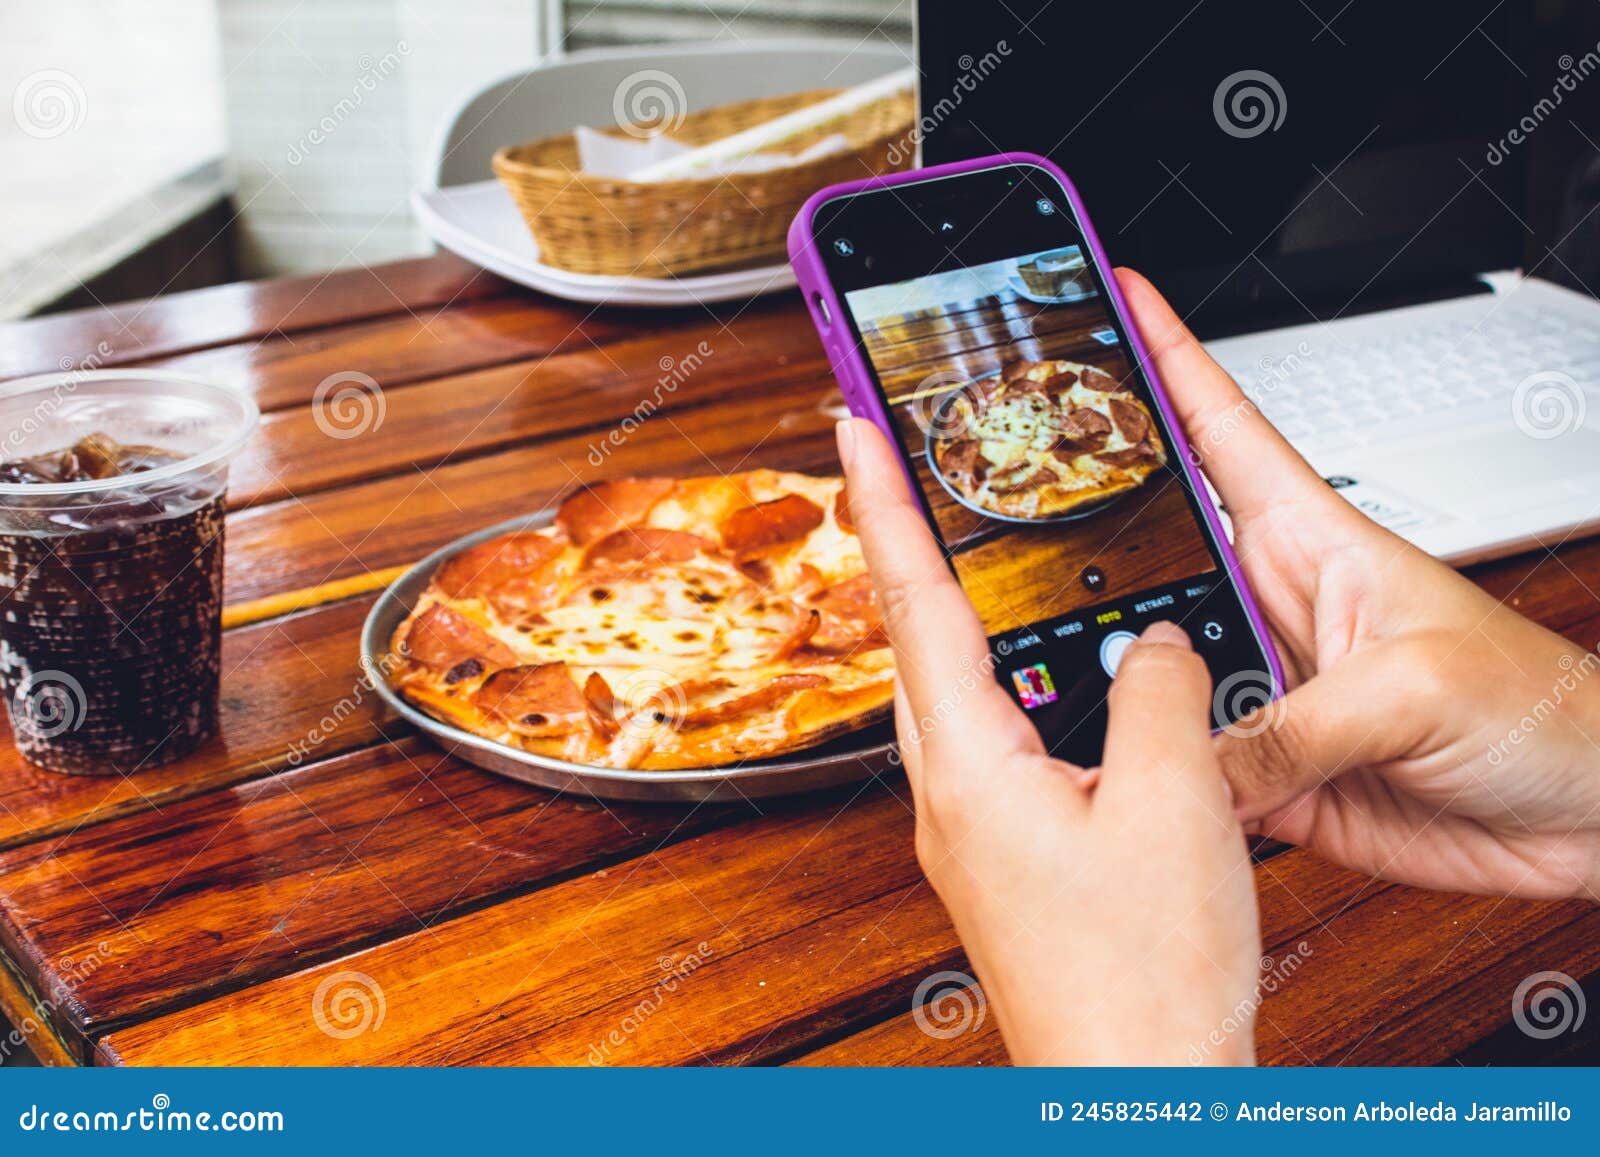 hand of person with mobile photographing food to publish on networks